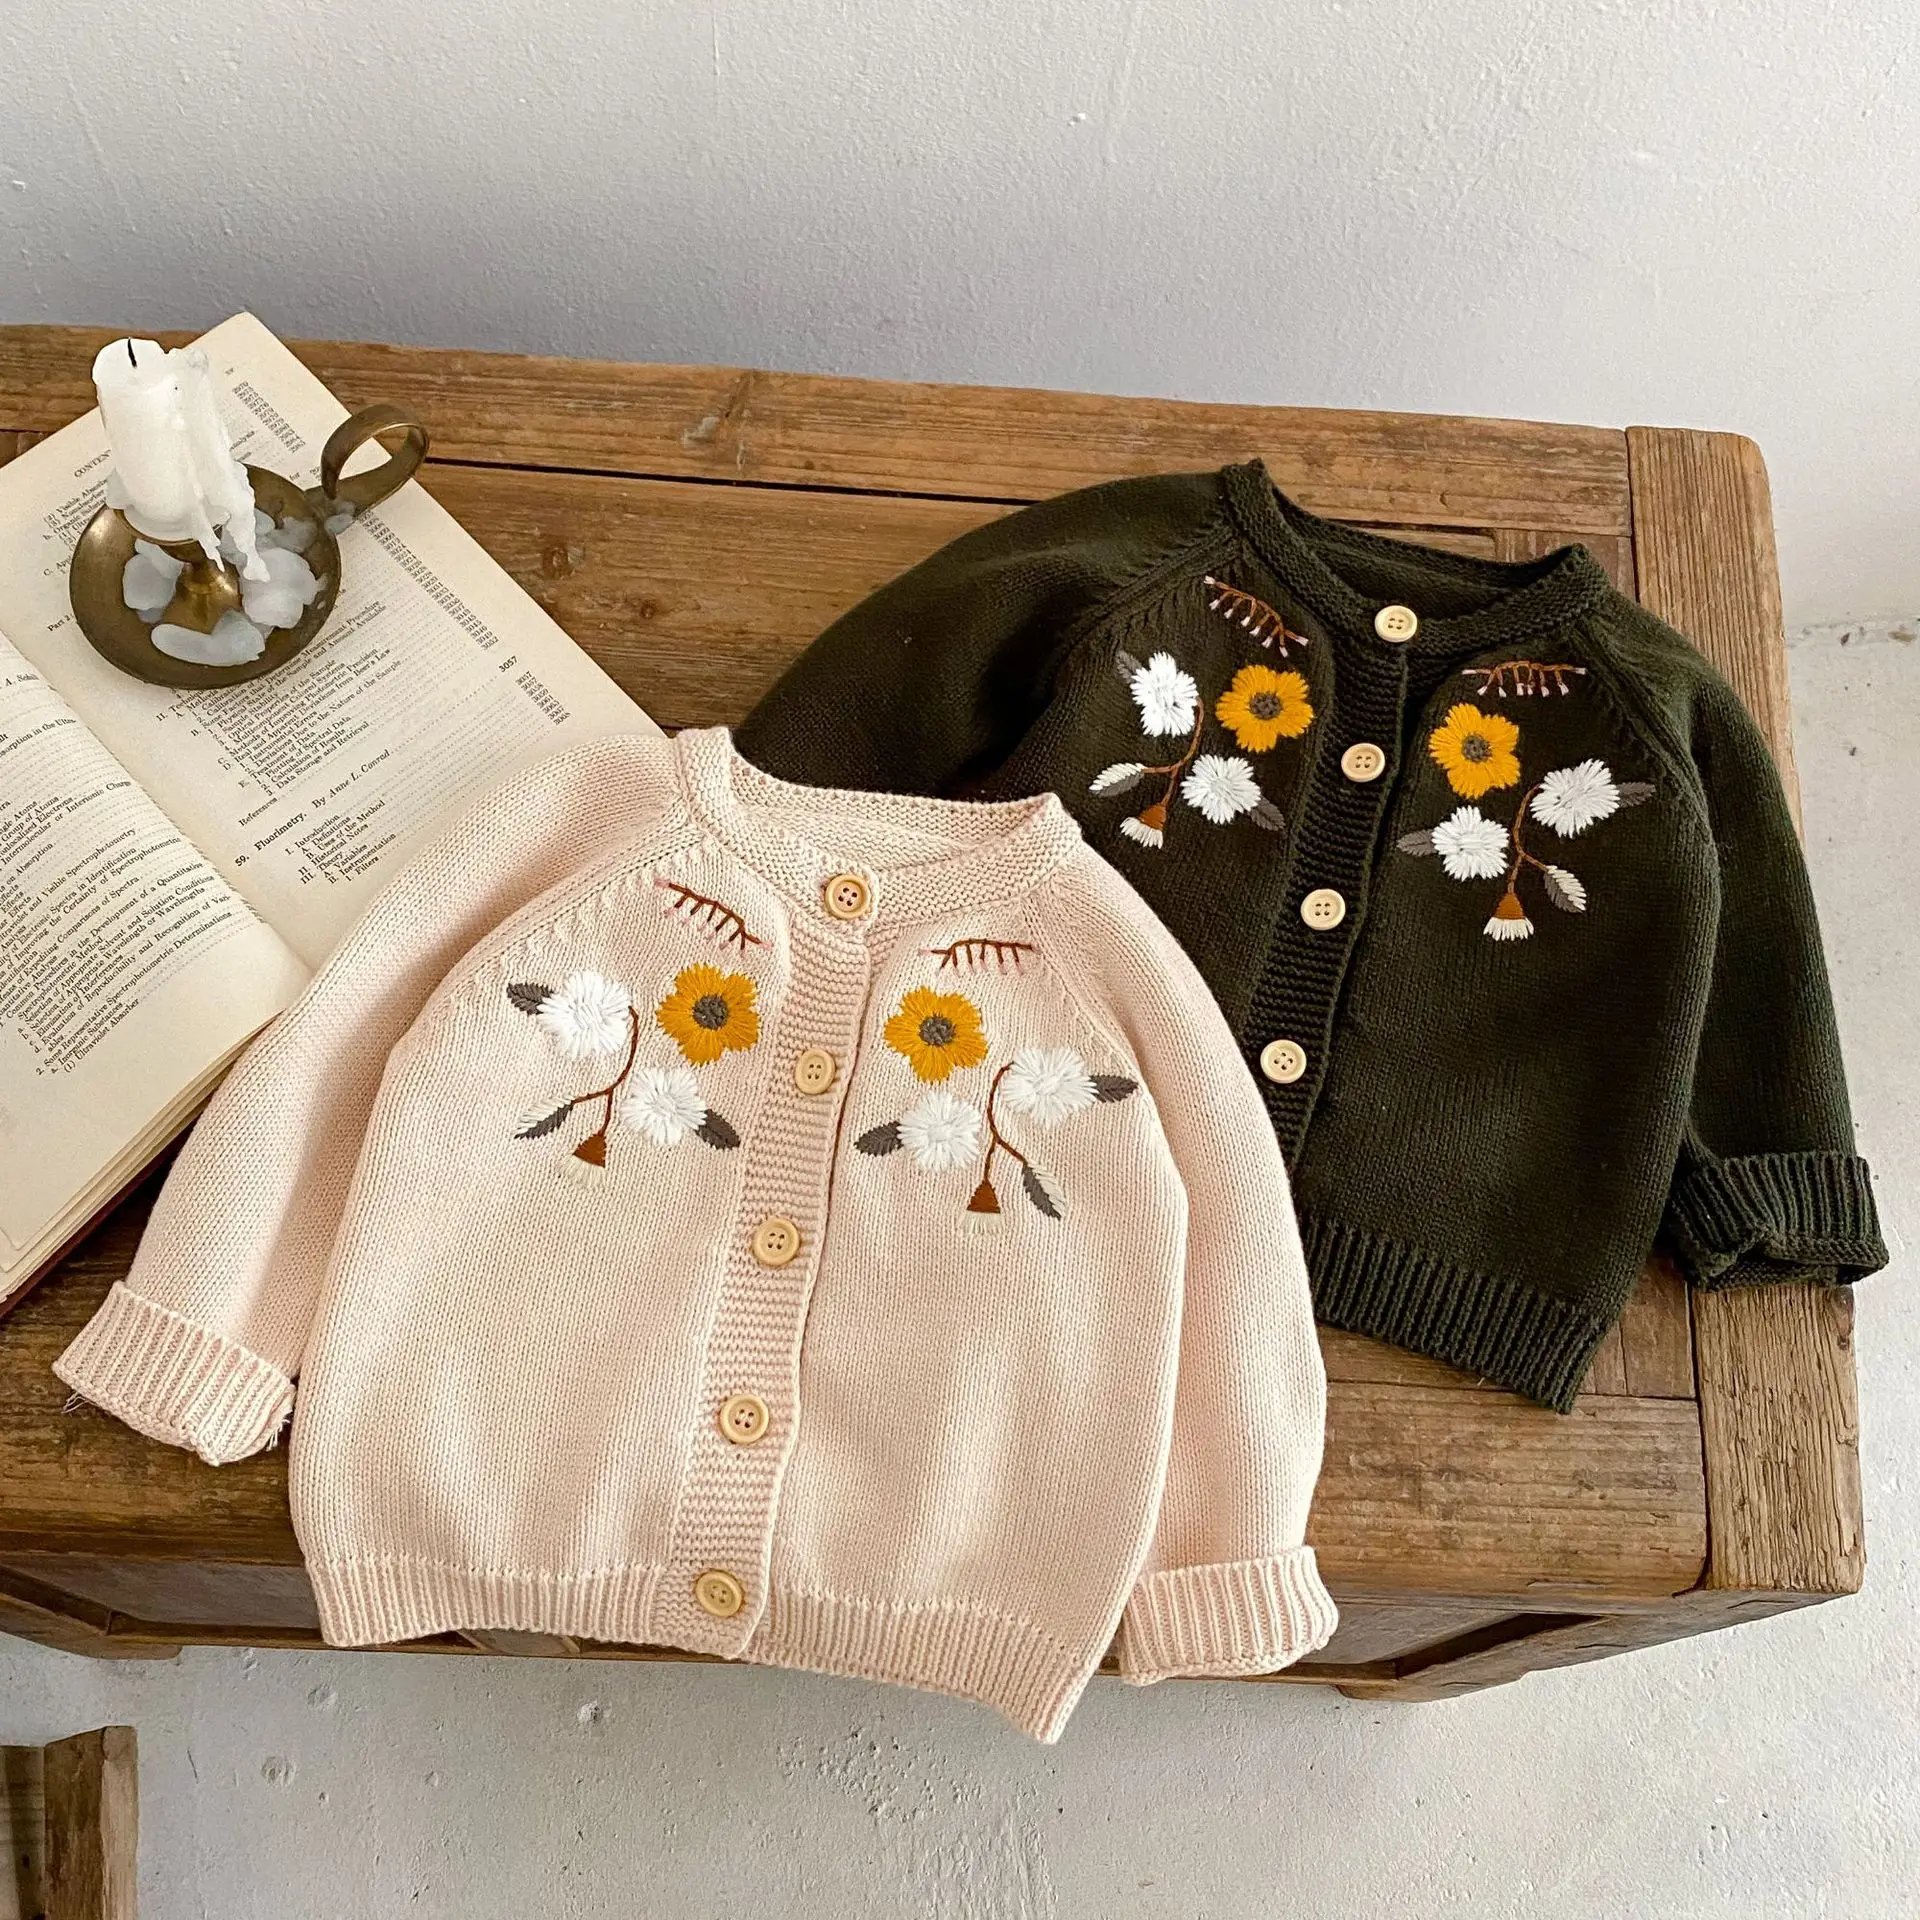 New Spring and Autumn Newborn Coat Baby Baby Baby Embroidery Knitted Coat Cotton Yarn Long Sleeve Cardigan Sweater